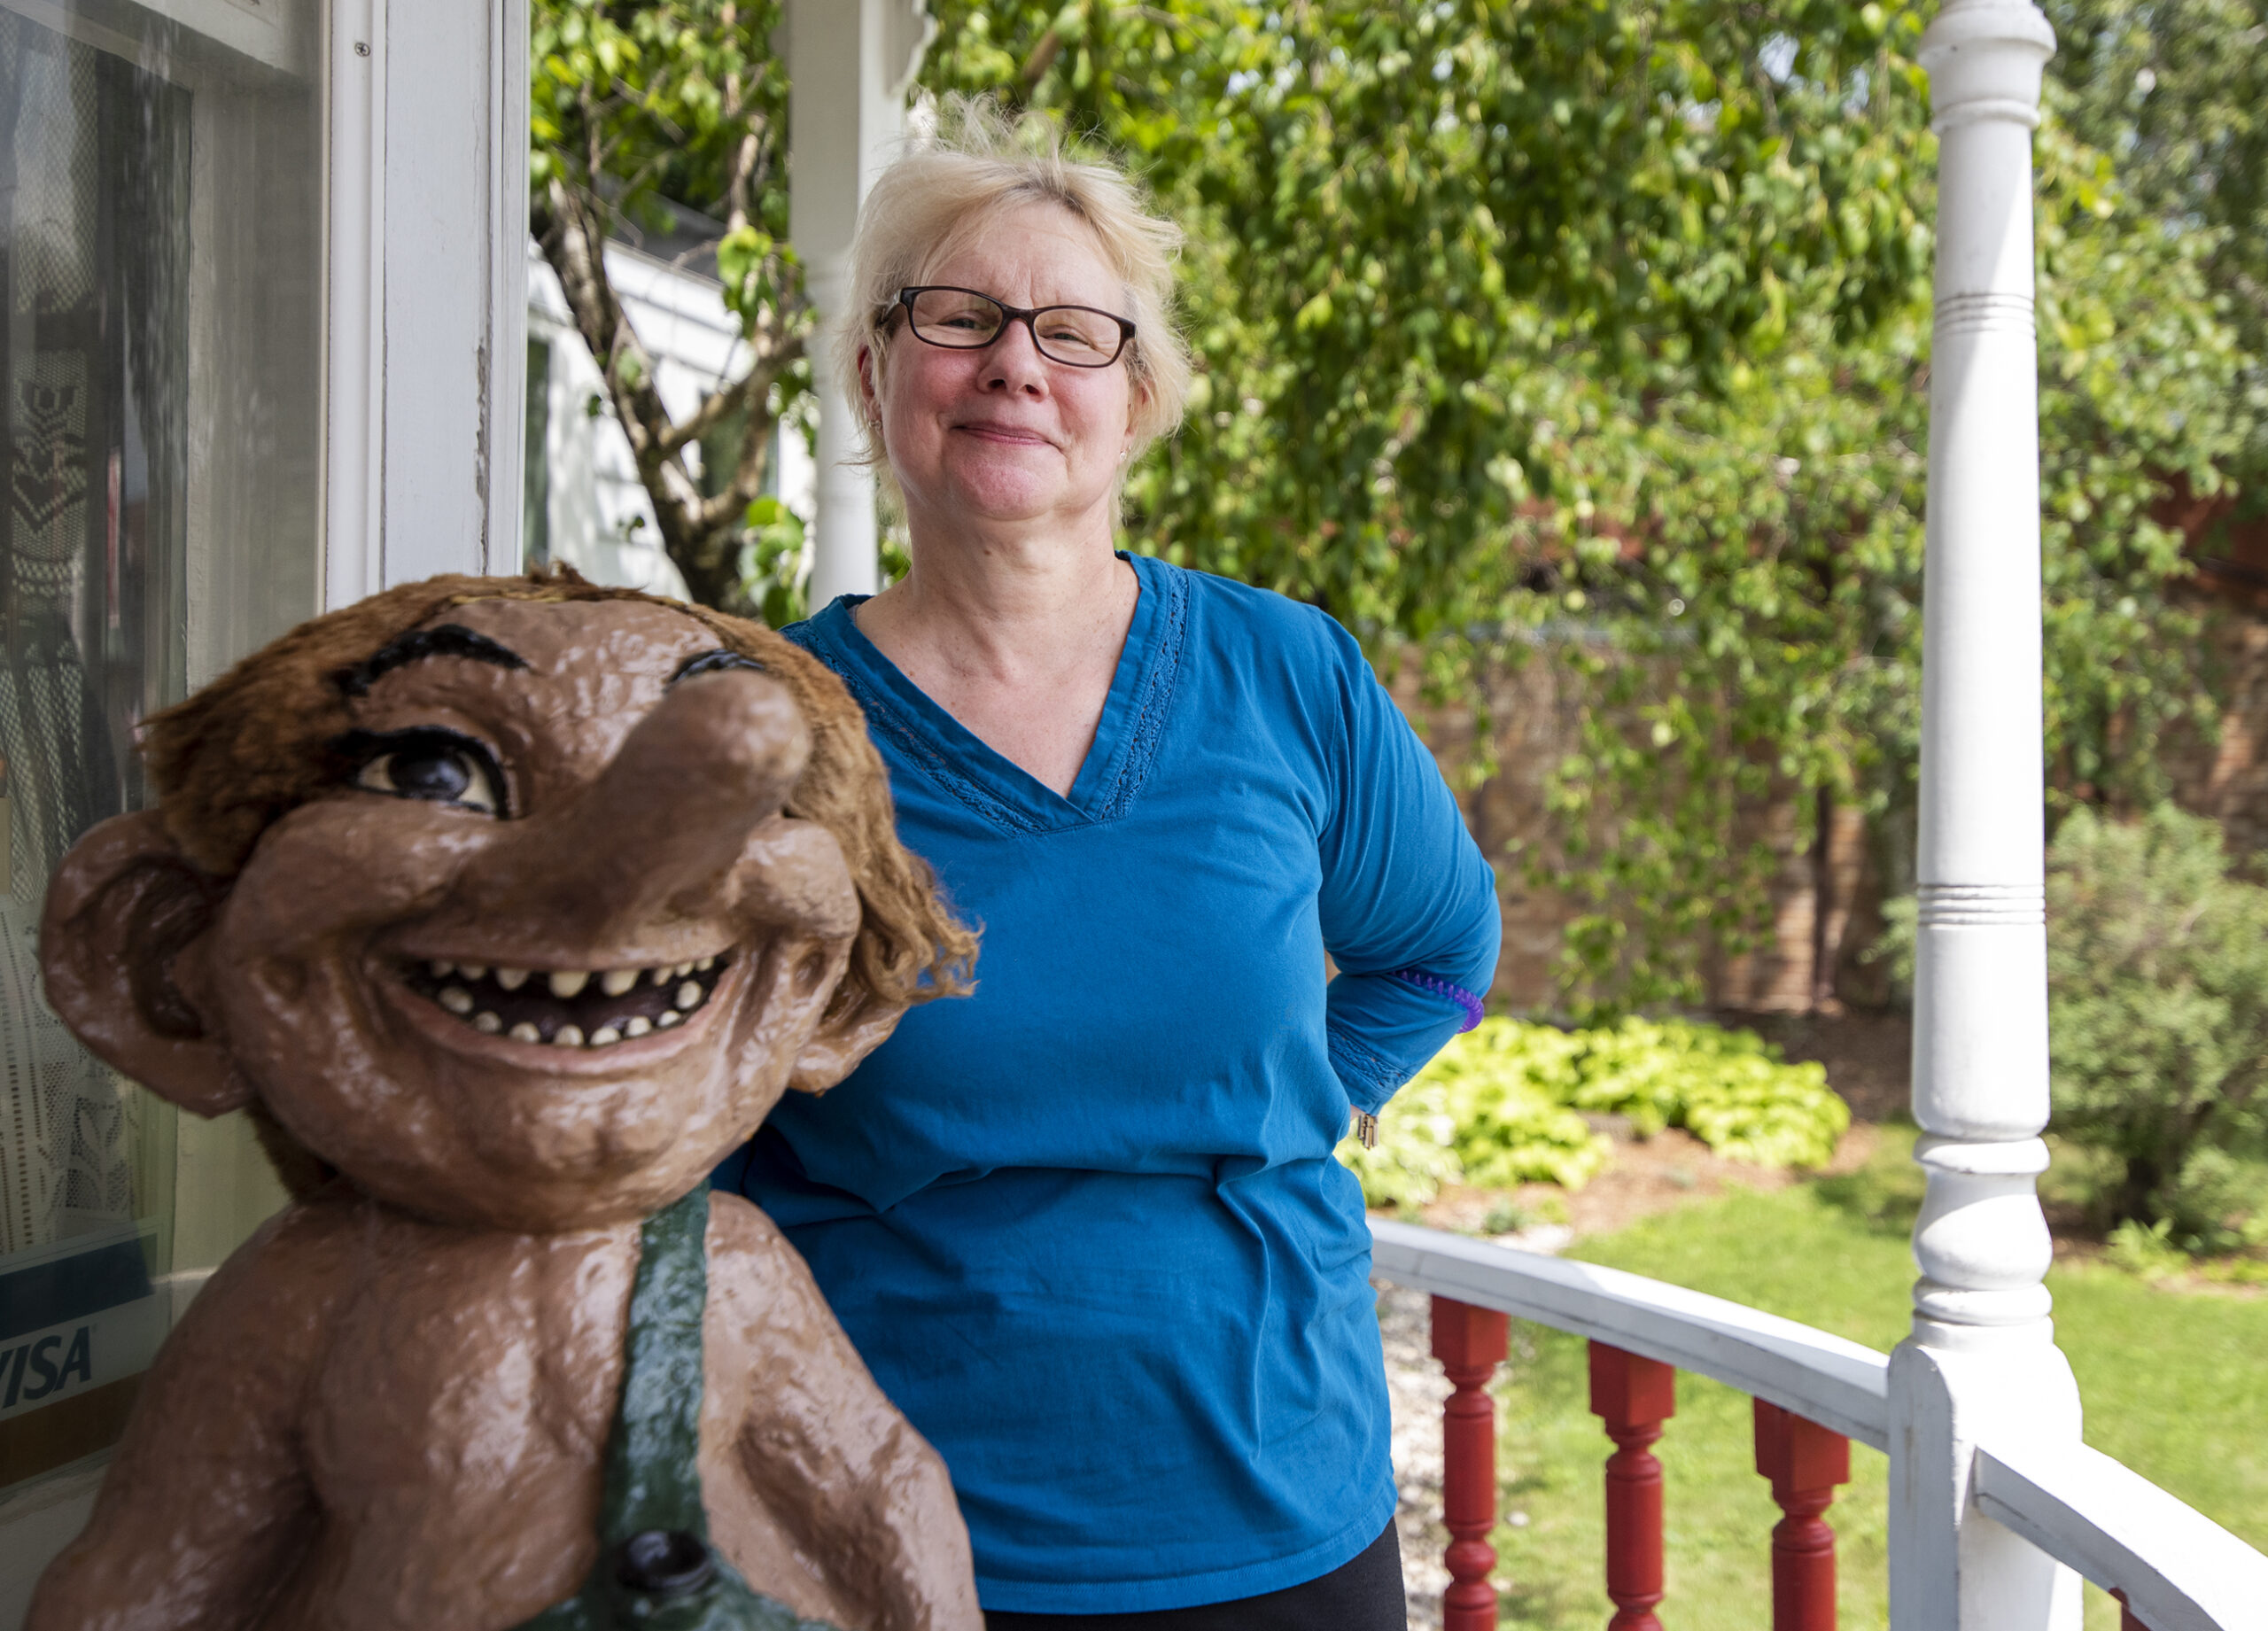 A woman stands next to a troll statue with a large nose.